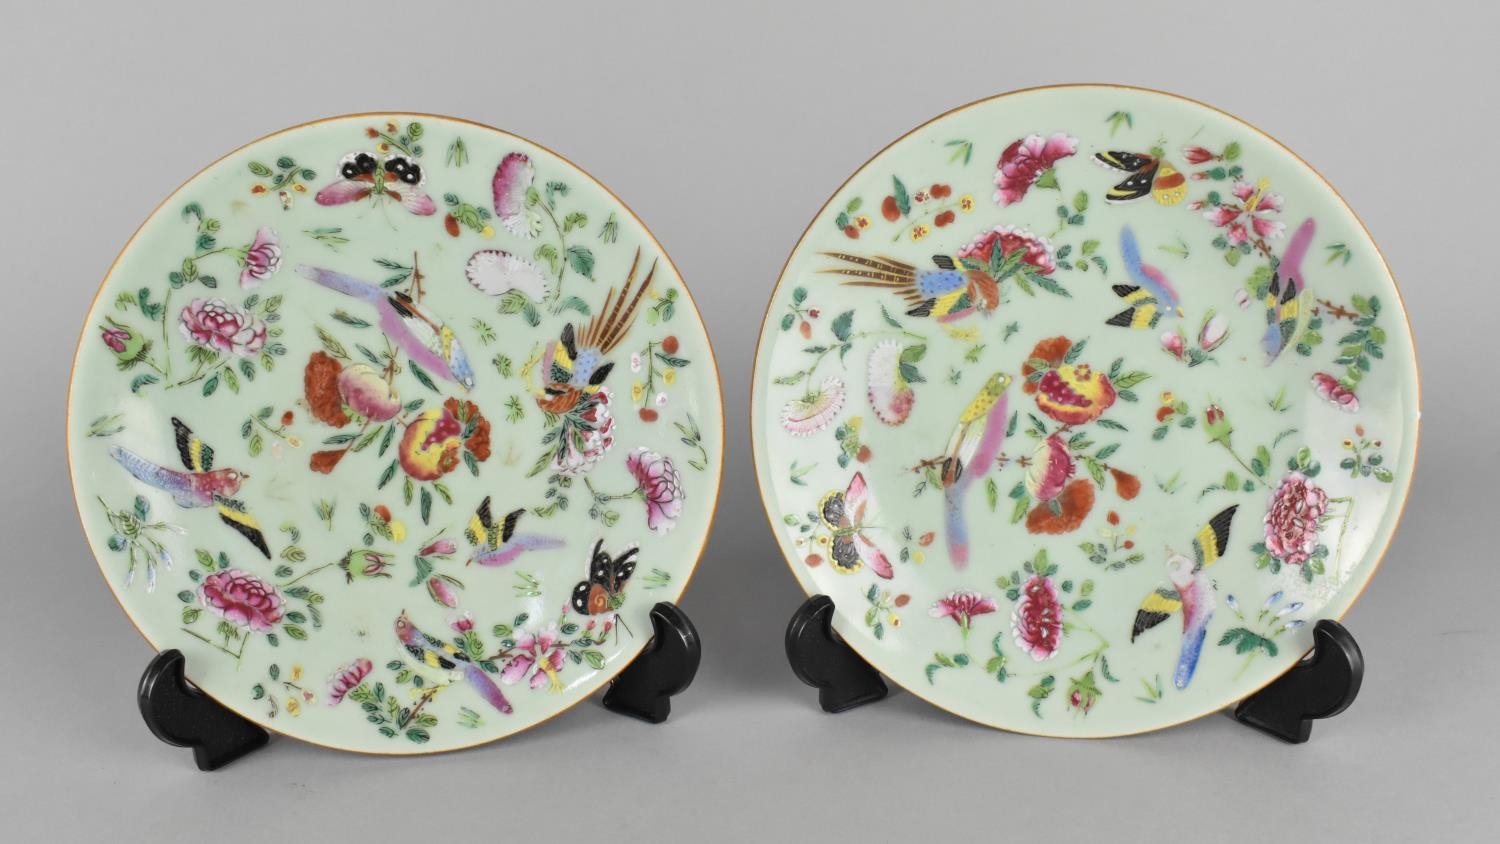 A Pair of Late Qing Dynasty Celadon Glazed Plates Decorated in the Famille Rose Palette with Birds